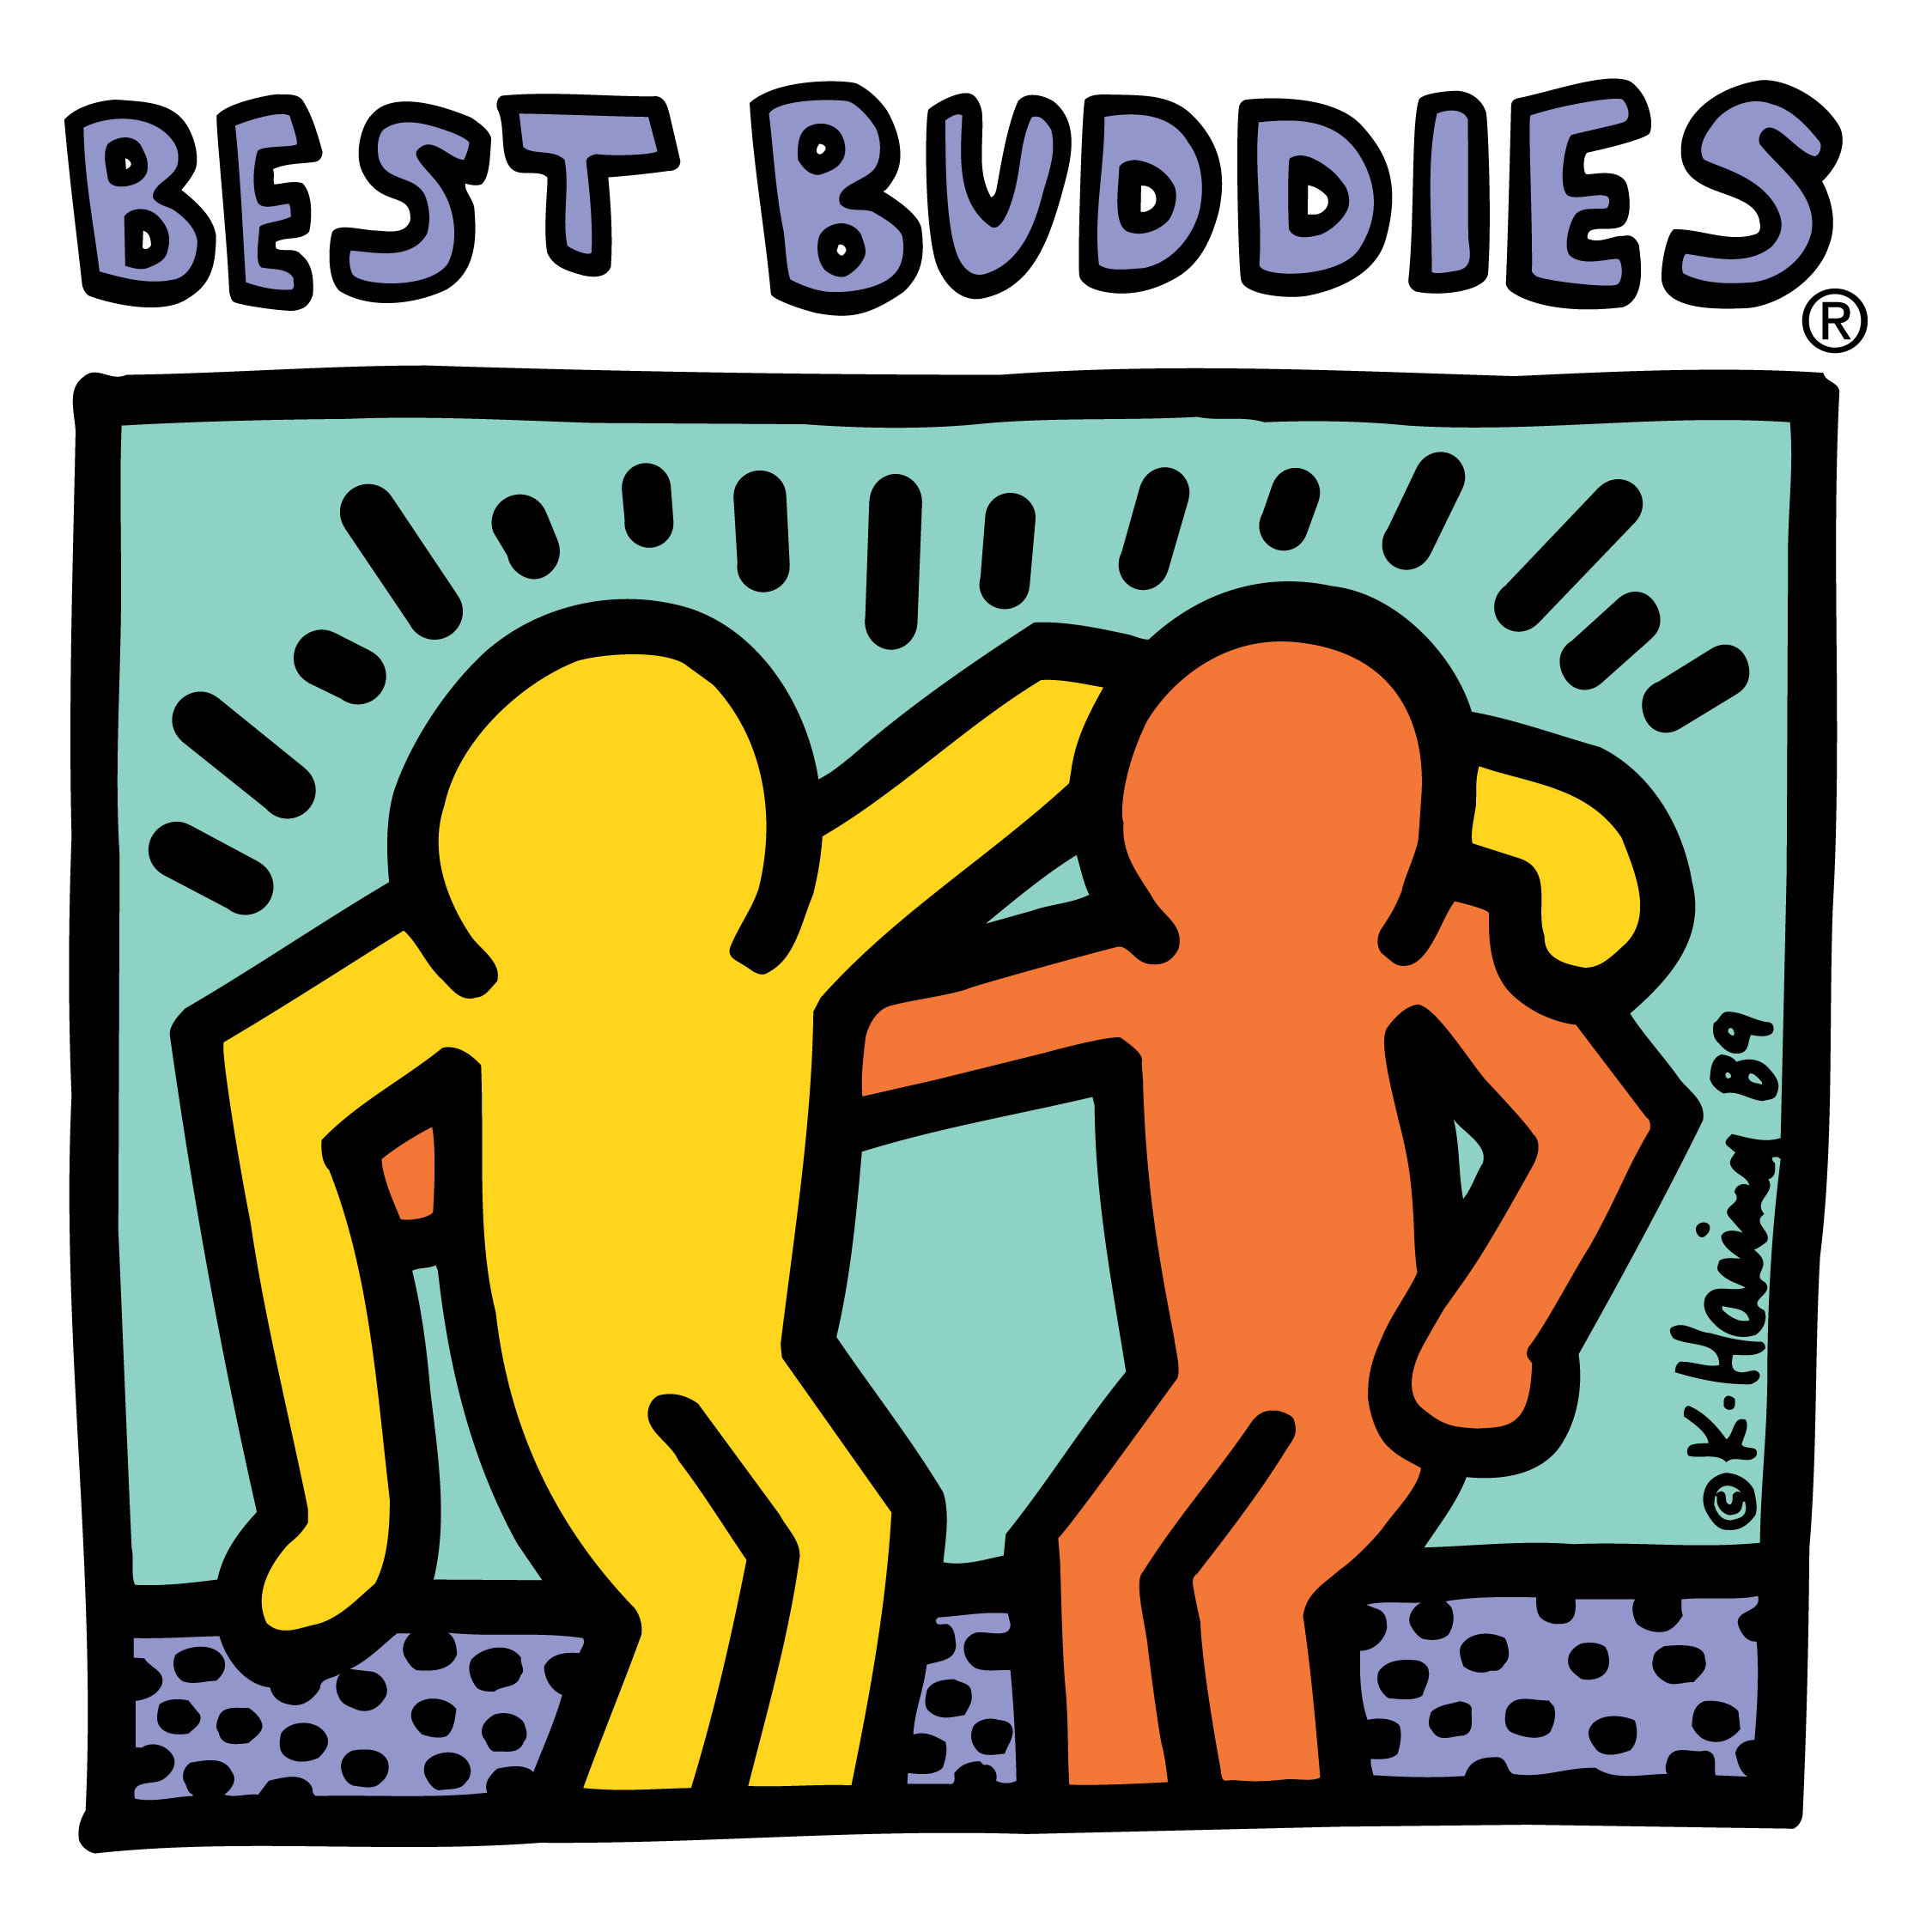 Two individuals appear to be hanging out and bonding in the logo of the Best Buddies organization. The logo was created by Keith Haring and is meant to symbolize one-to-one friendship, affection and acceptance. 